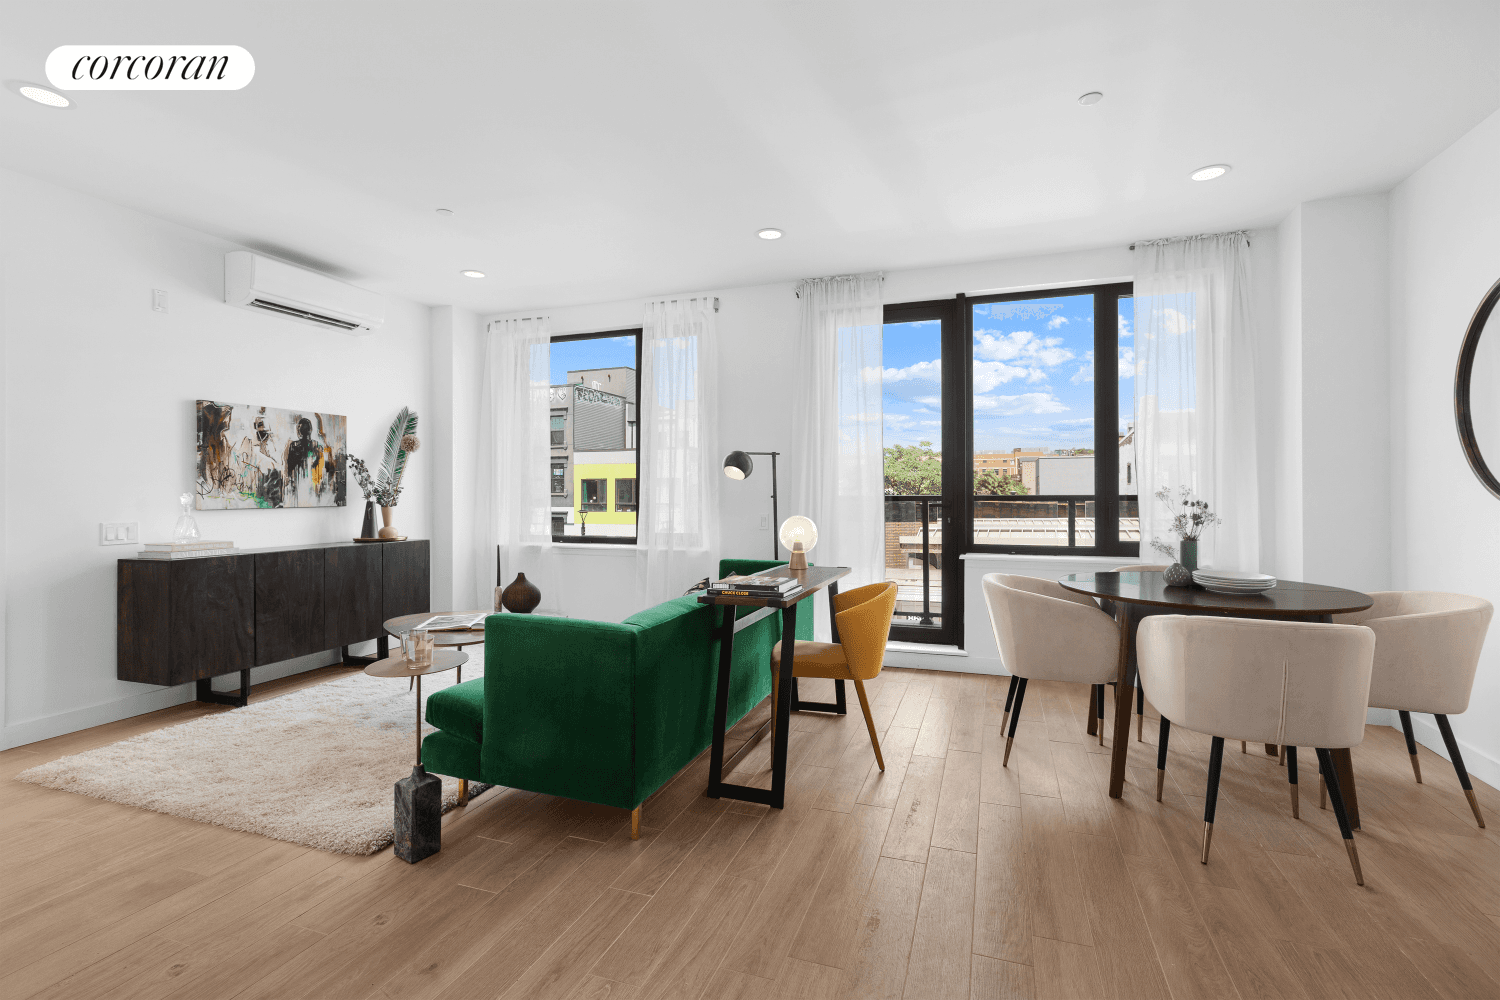 6G 1 Bed 1 Bath with BalconySituated on the border of Bed Stuy and Bushwick, The Stockton located at 912 Broadway is a brand new 8 story residential building offering ...